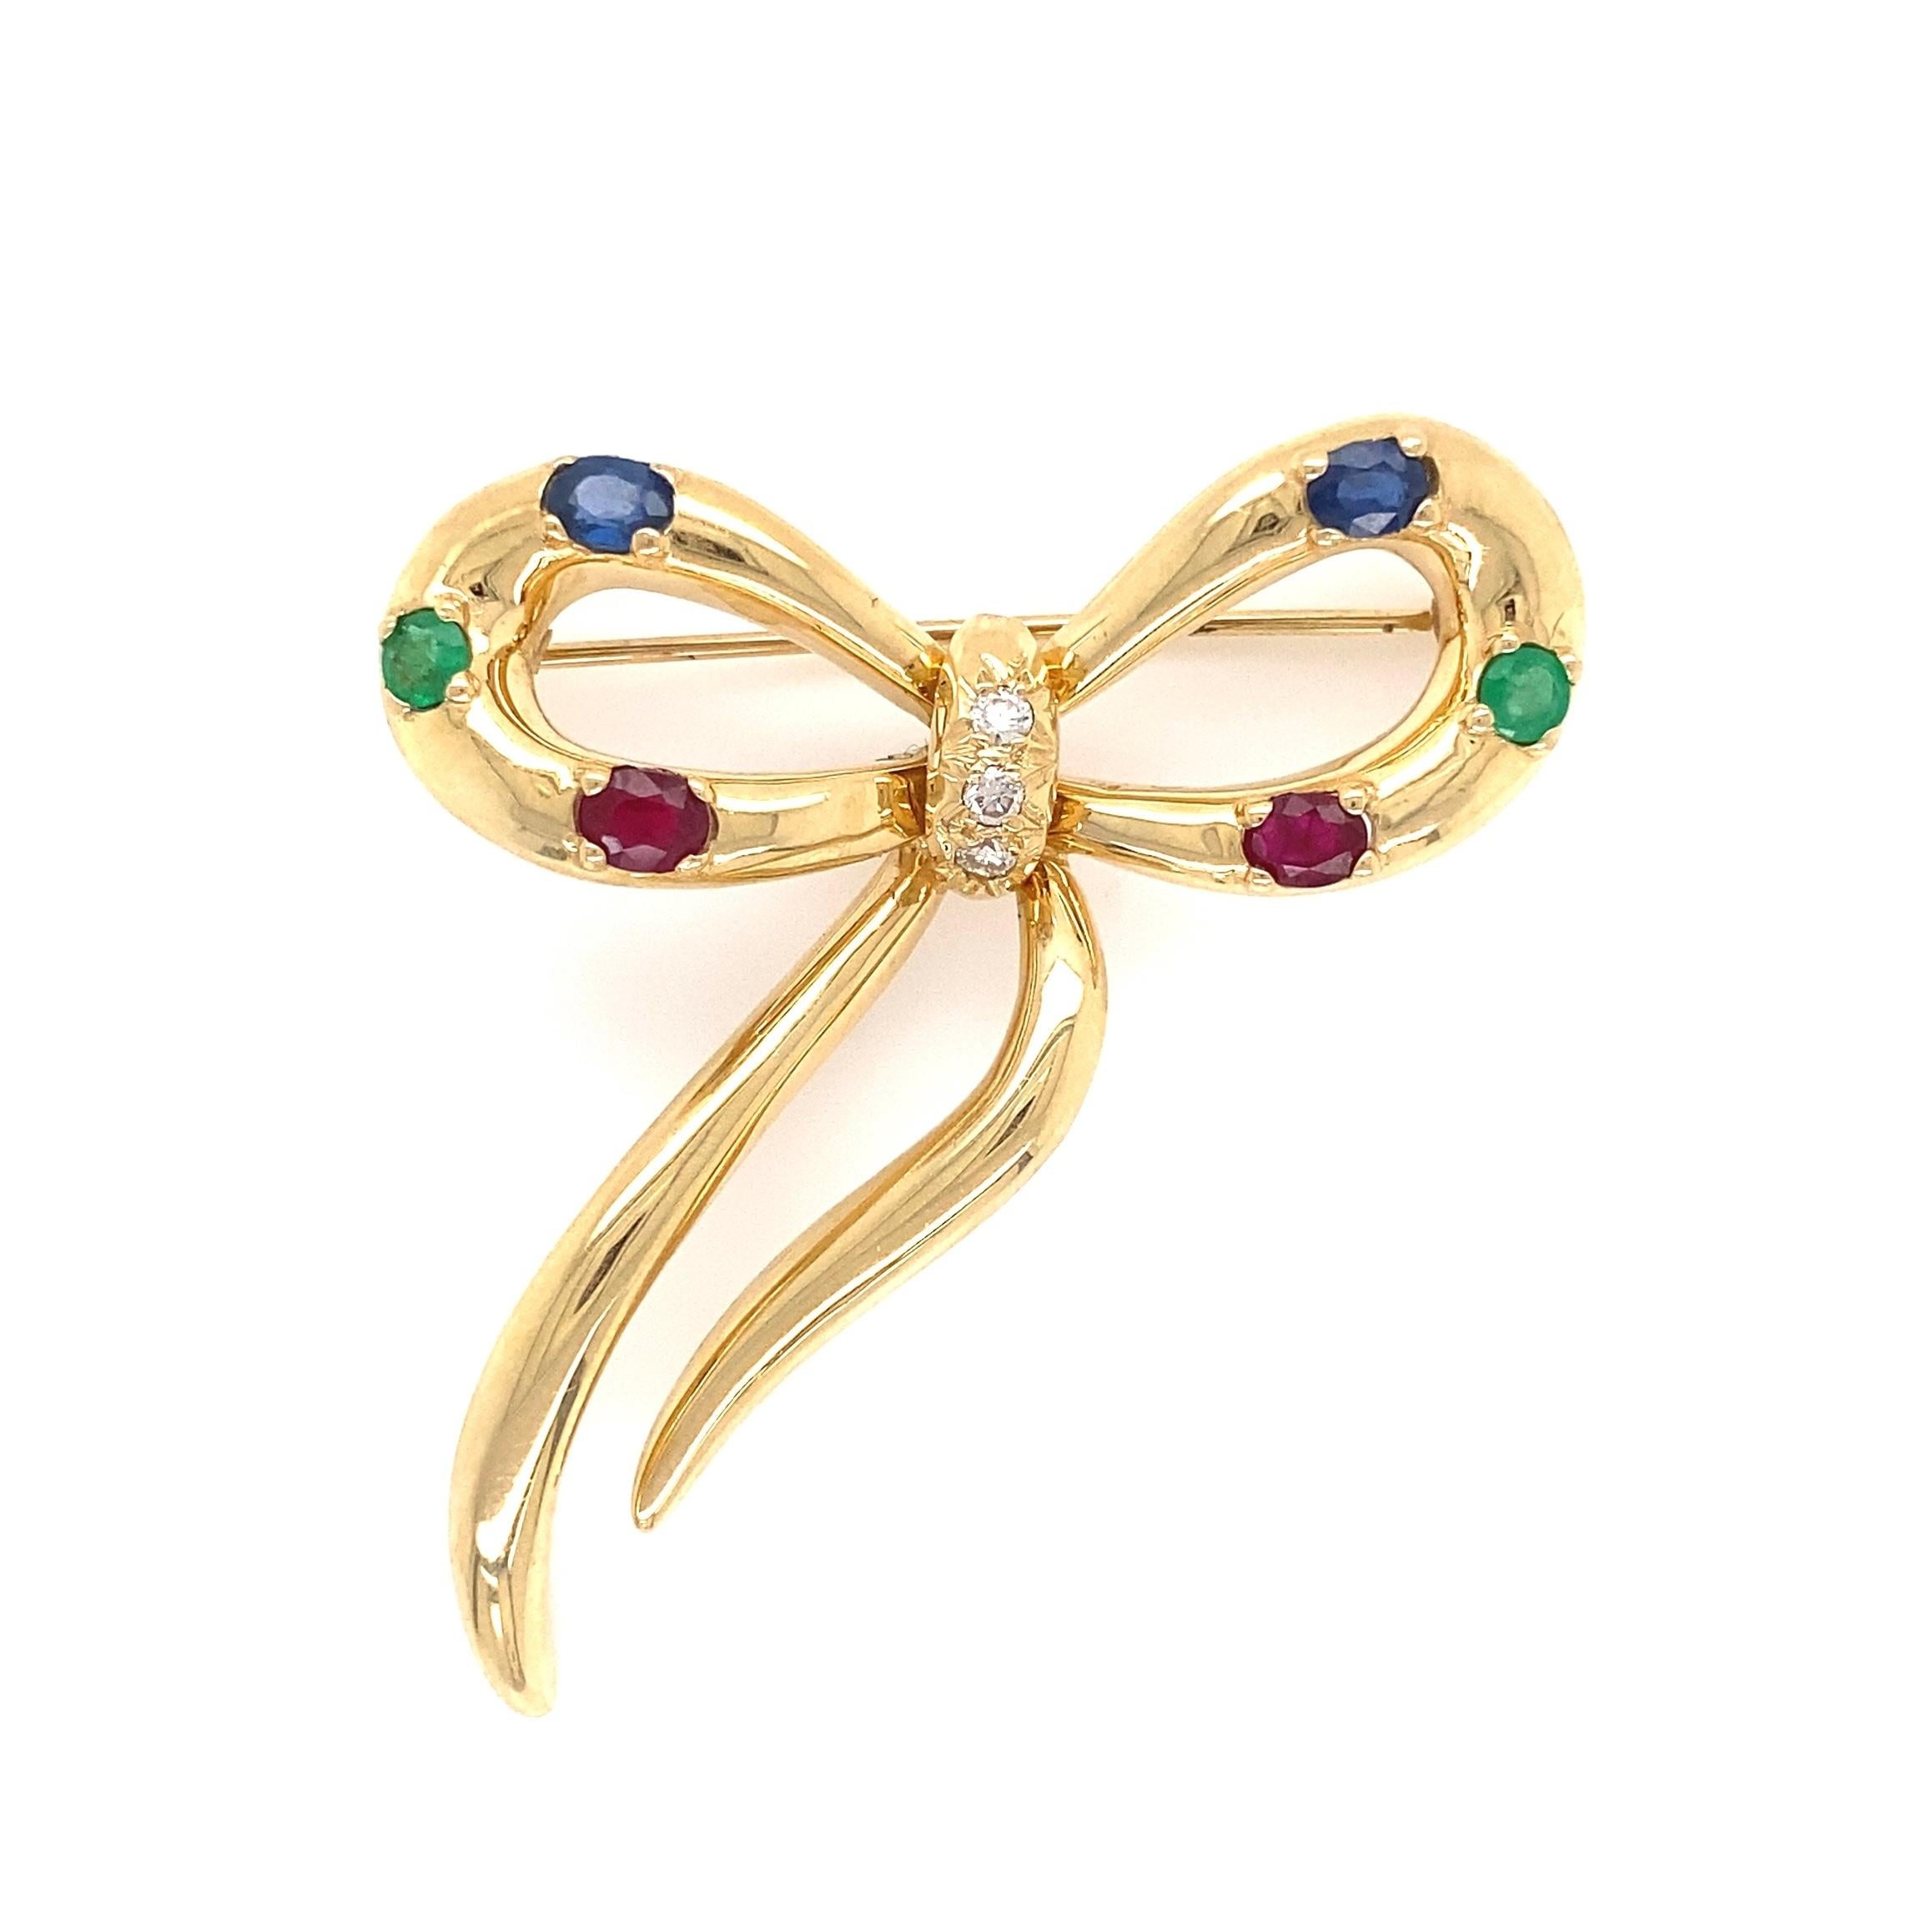 Beautiful Ribbon Bow Multi-Gem Gold Brooch. Hand crafted in 14K Yellow Gold and Hand set with 3 Diamonds approx. 0.08tcw in center and enhanced around the bow with 2 oval Rubies approx. 0.50tcw, 2 round Emeralds approx. 0.28tcw and 2 oval Sapphires